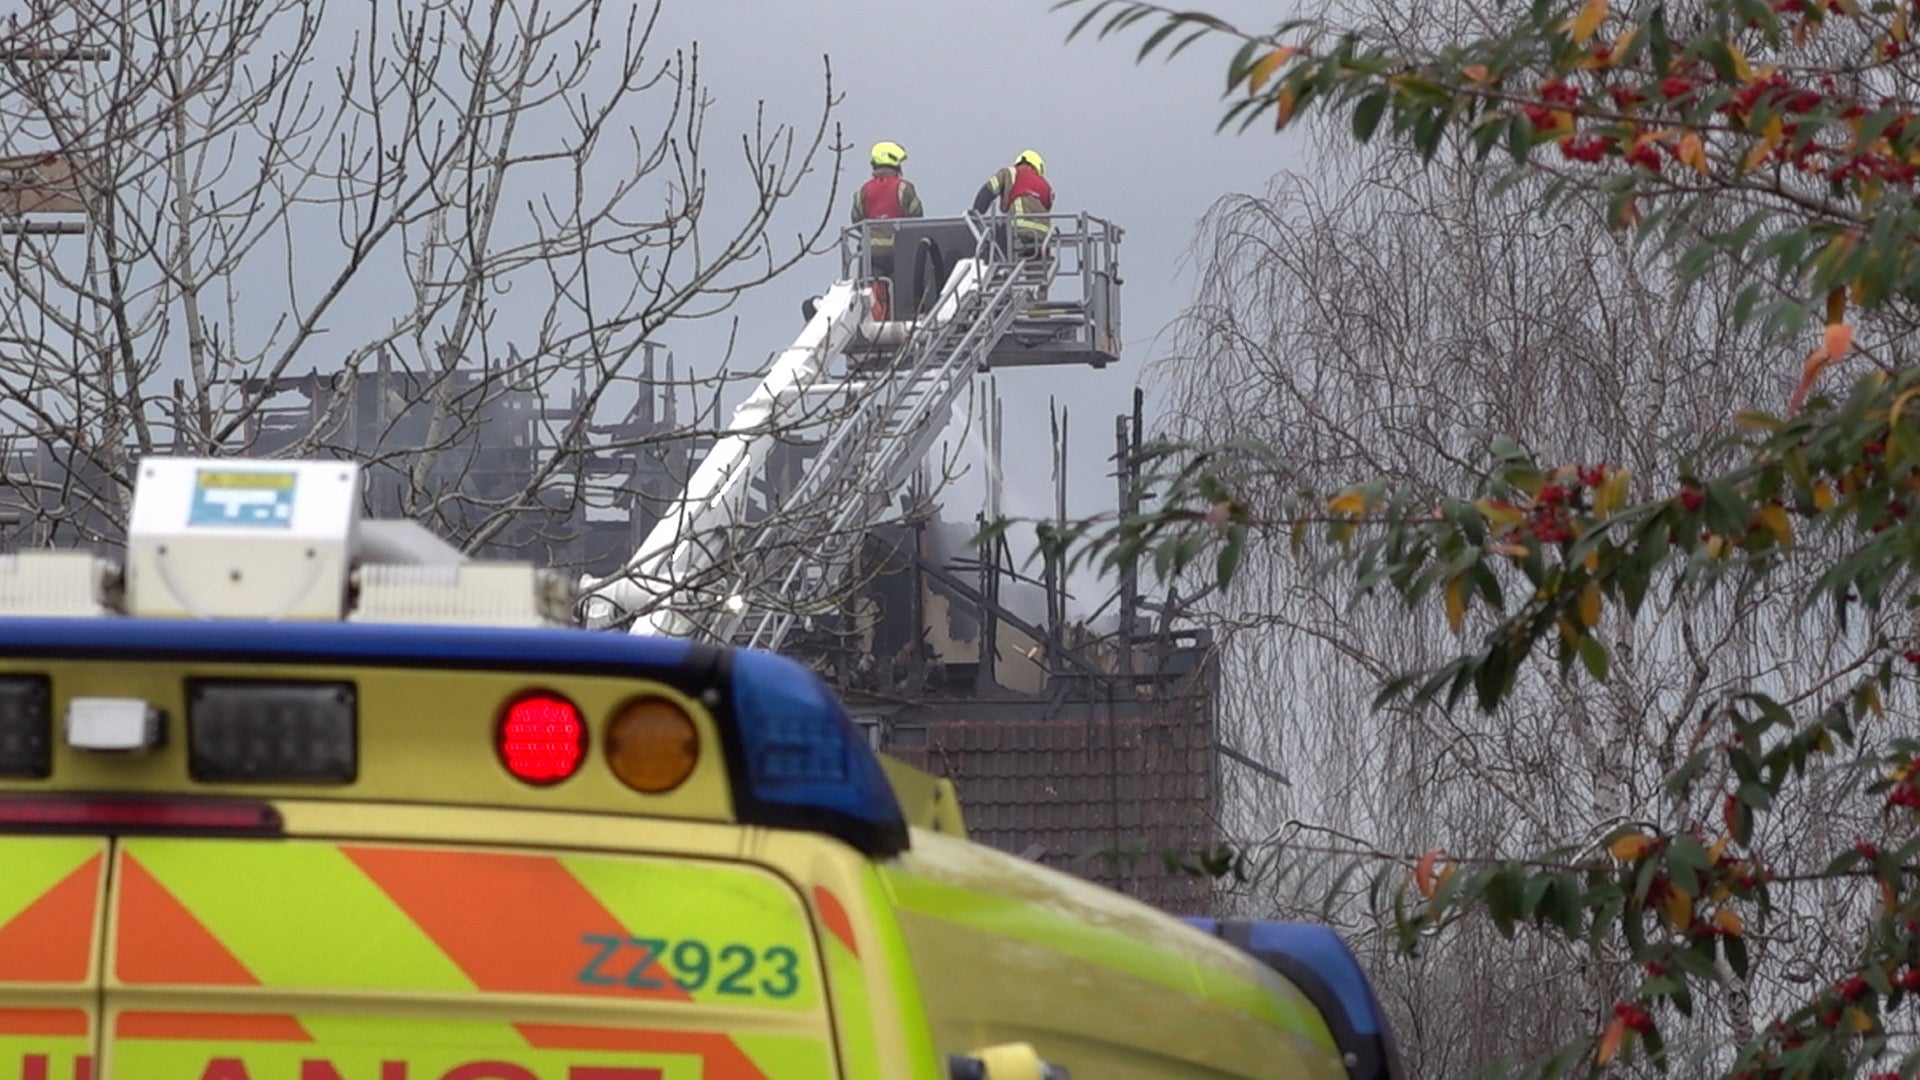 Firefighters view the destroyed building from a raised platform (Marc Ward/PA)